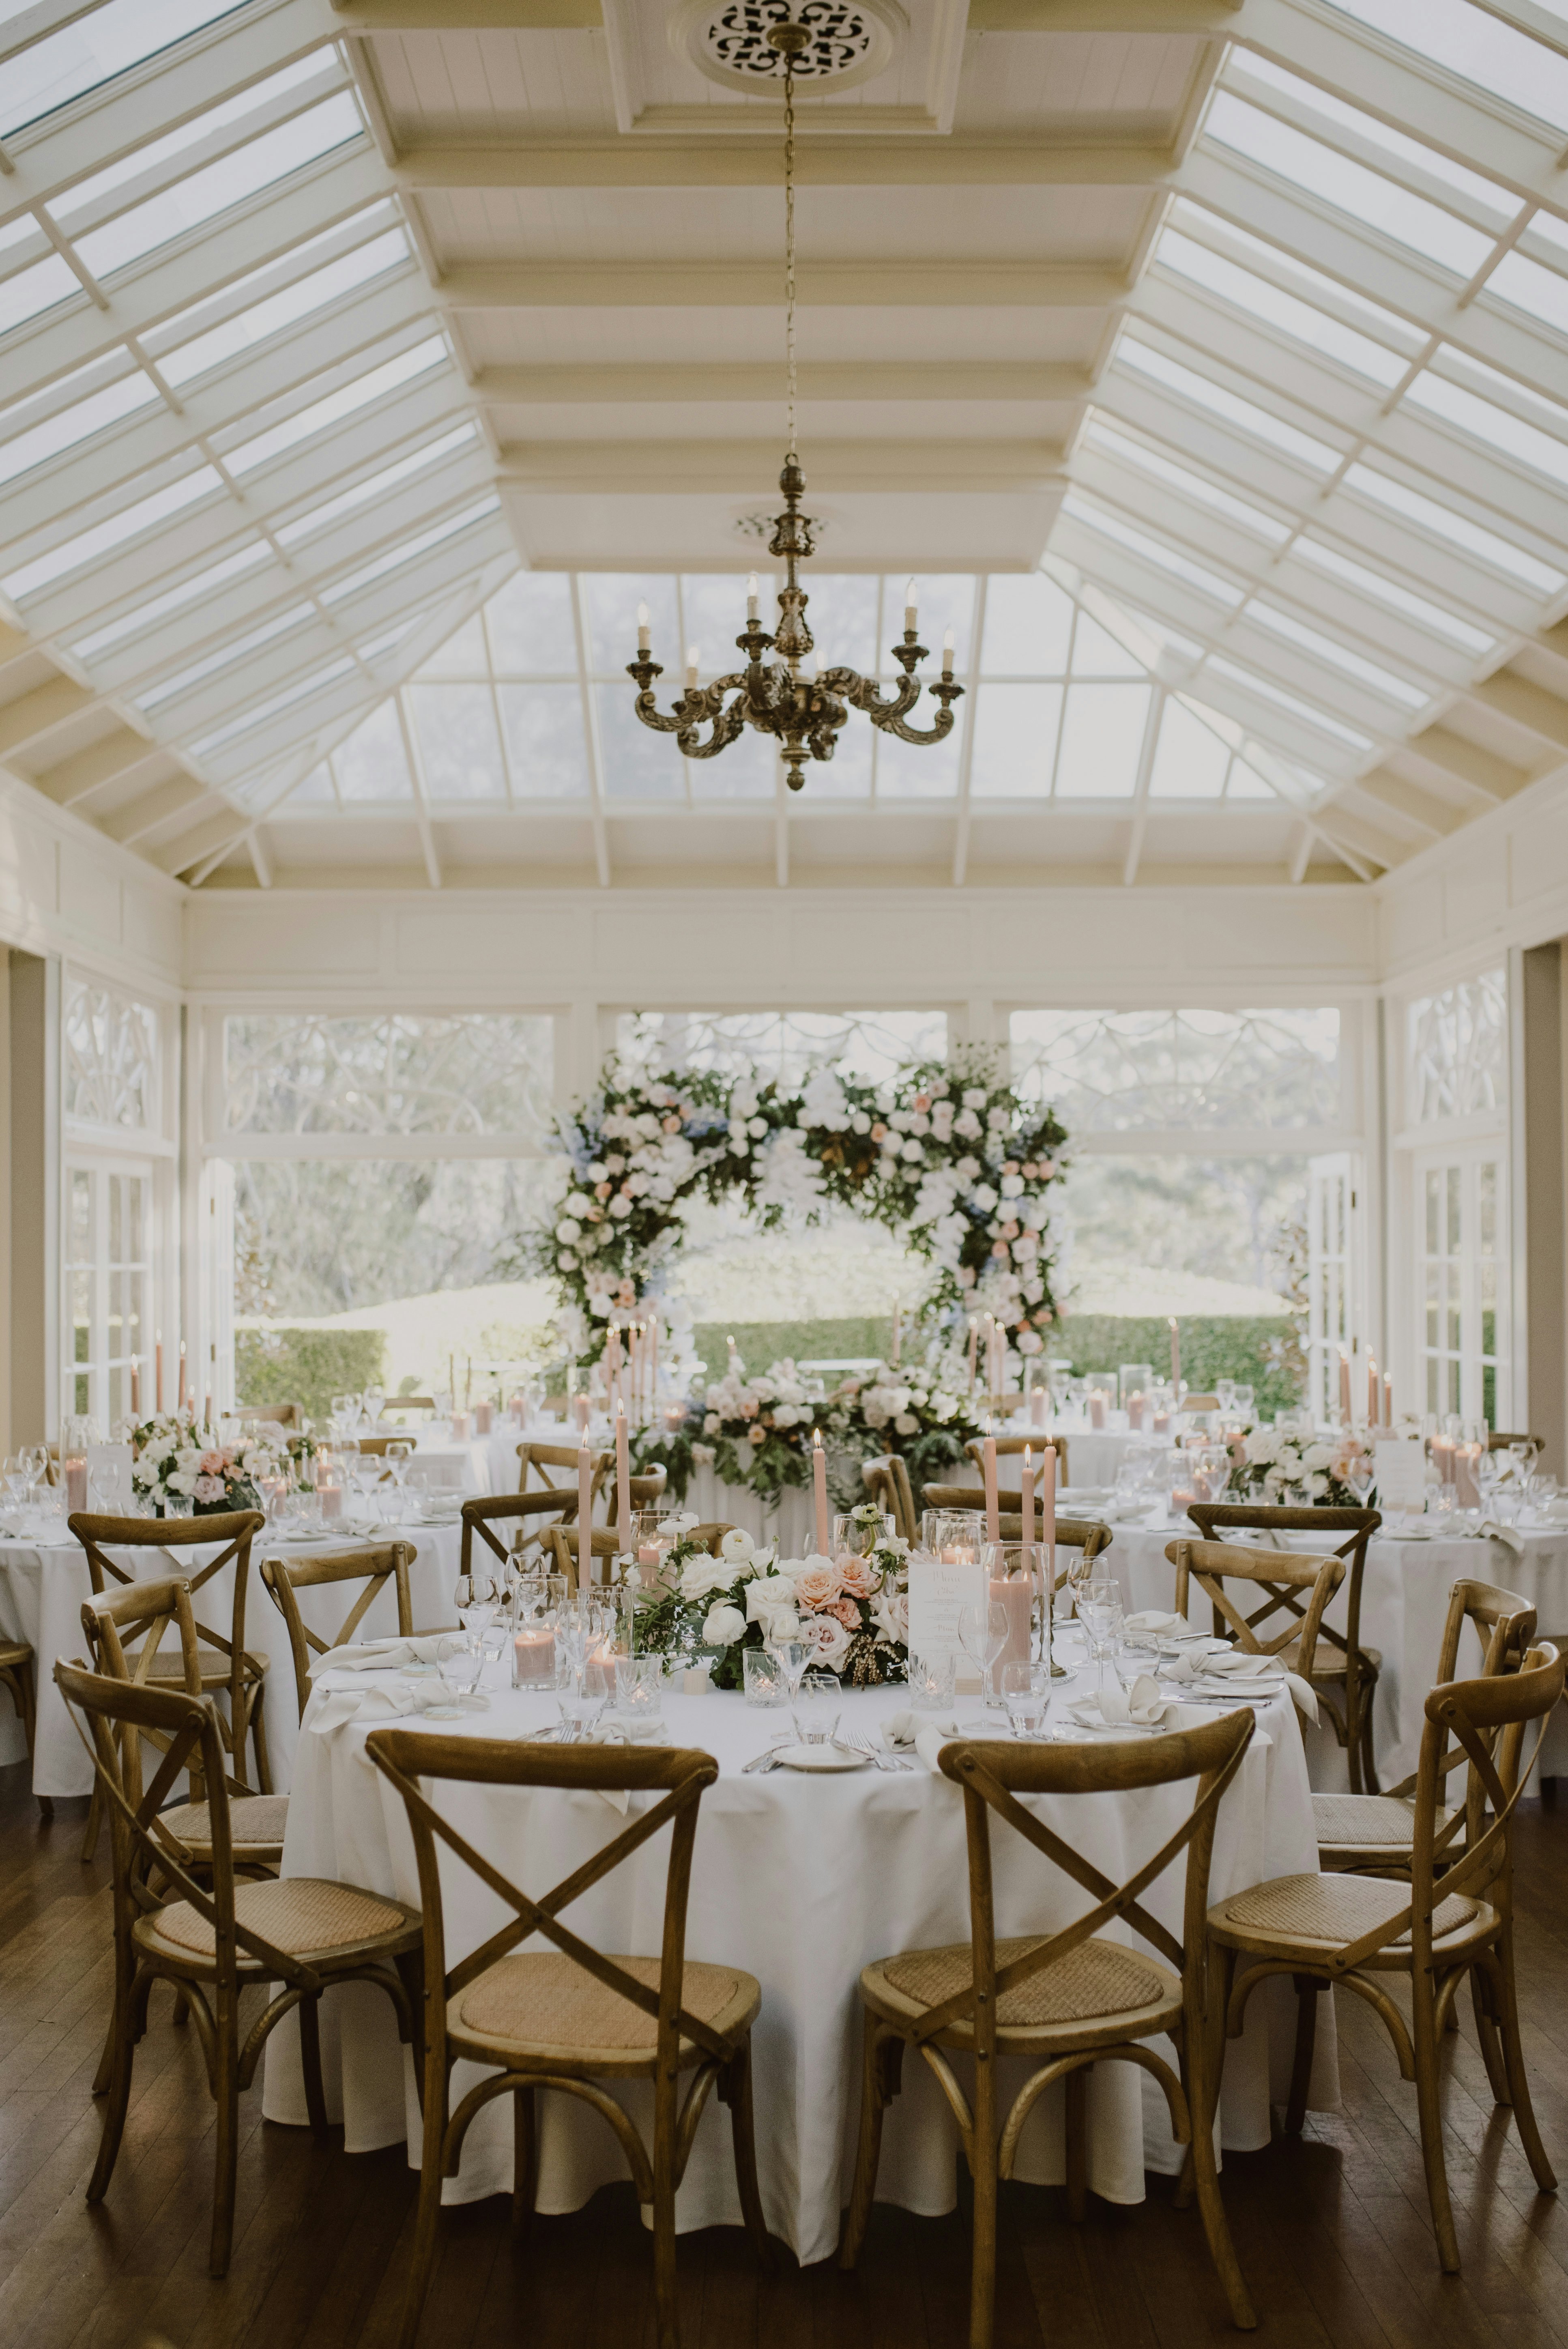 Wedding reception setting with round wooden tables and flowers 